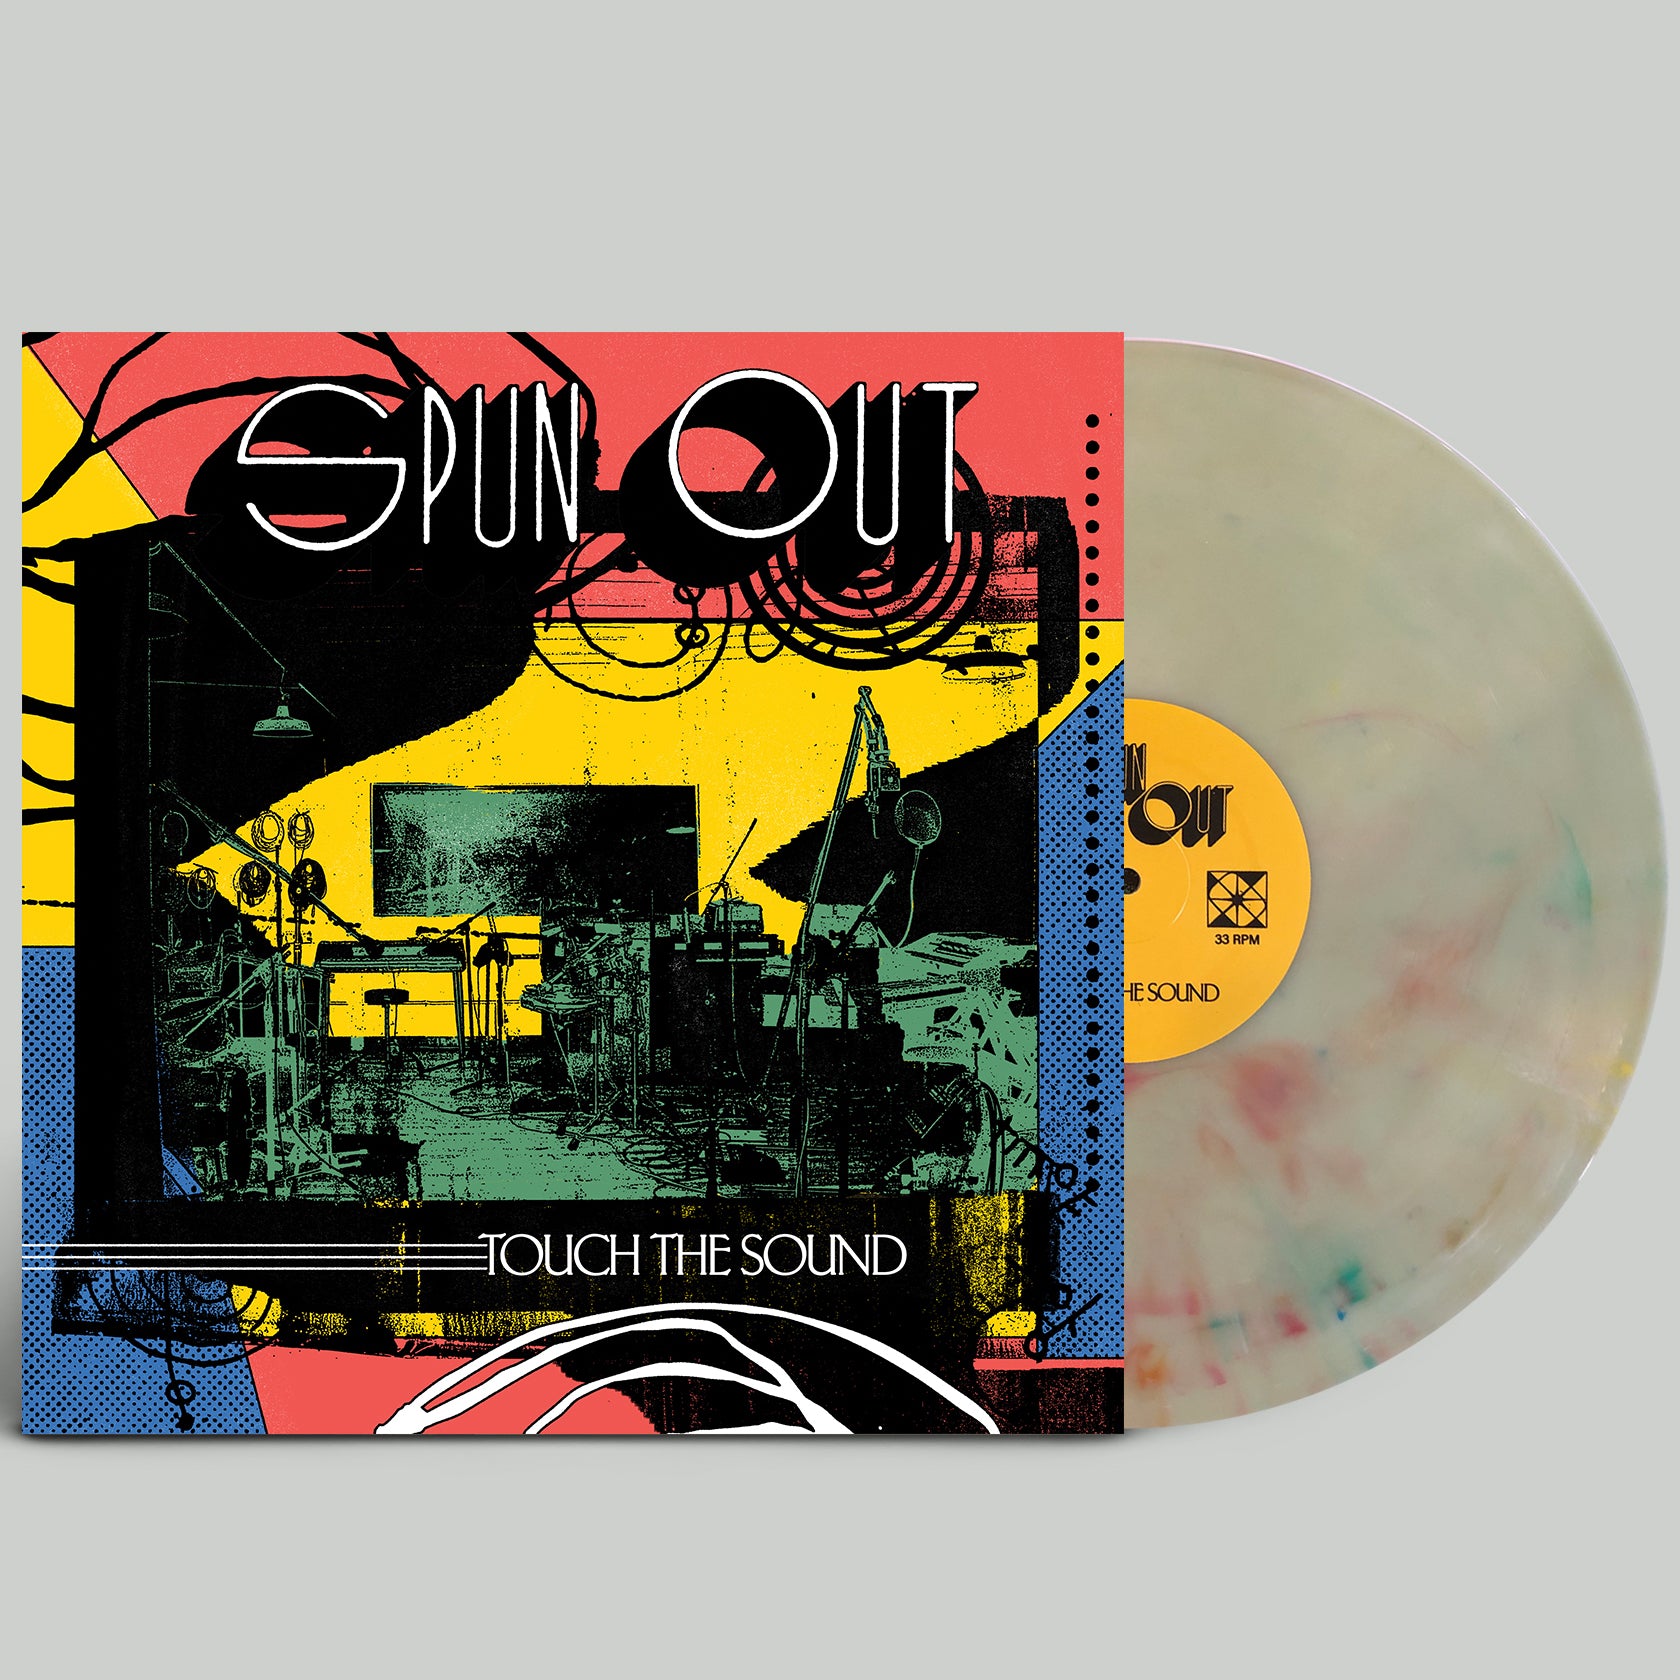 Spun Out ‎–  Touch the Sound - Mint- LP Record 2020 Shuga Records 1st Press Snot Rocket Colored Vinyl, Insert & Numbered (1/58 made) - Indie Rock / Pop Rock / Psych Rock